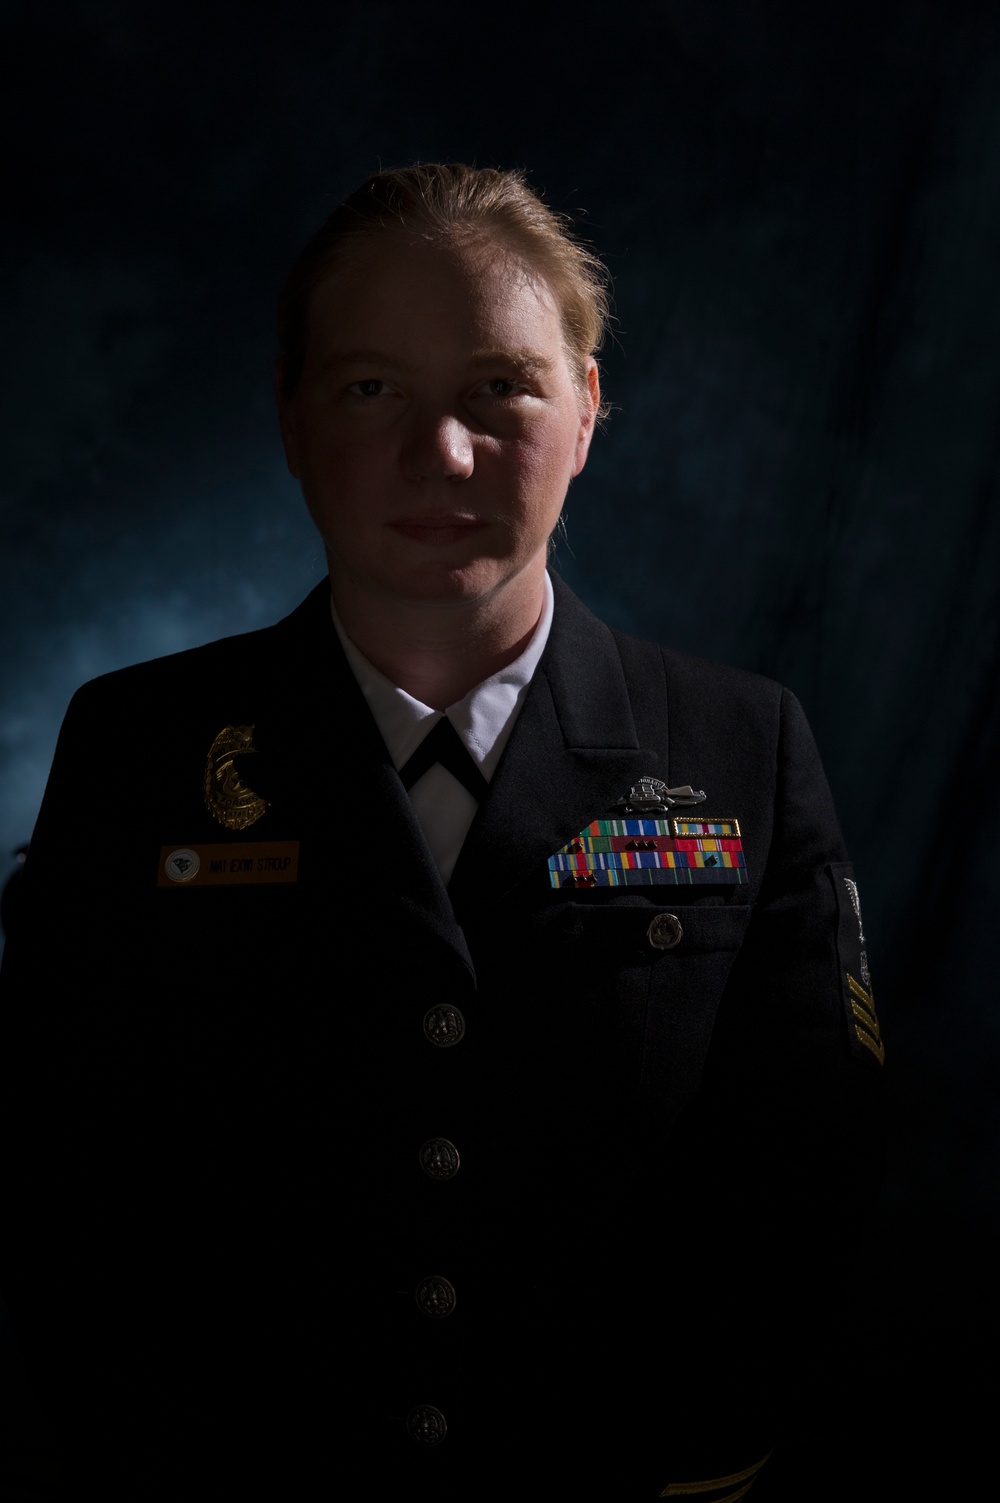 Highlighting women of character: Petty Officer 1st Class Stroup